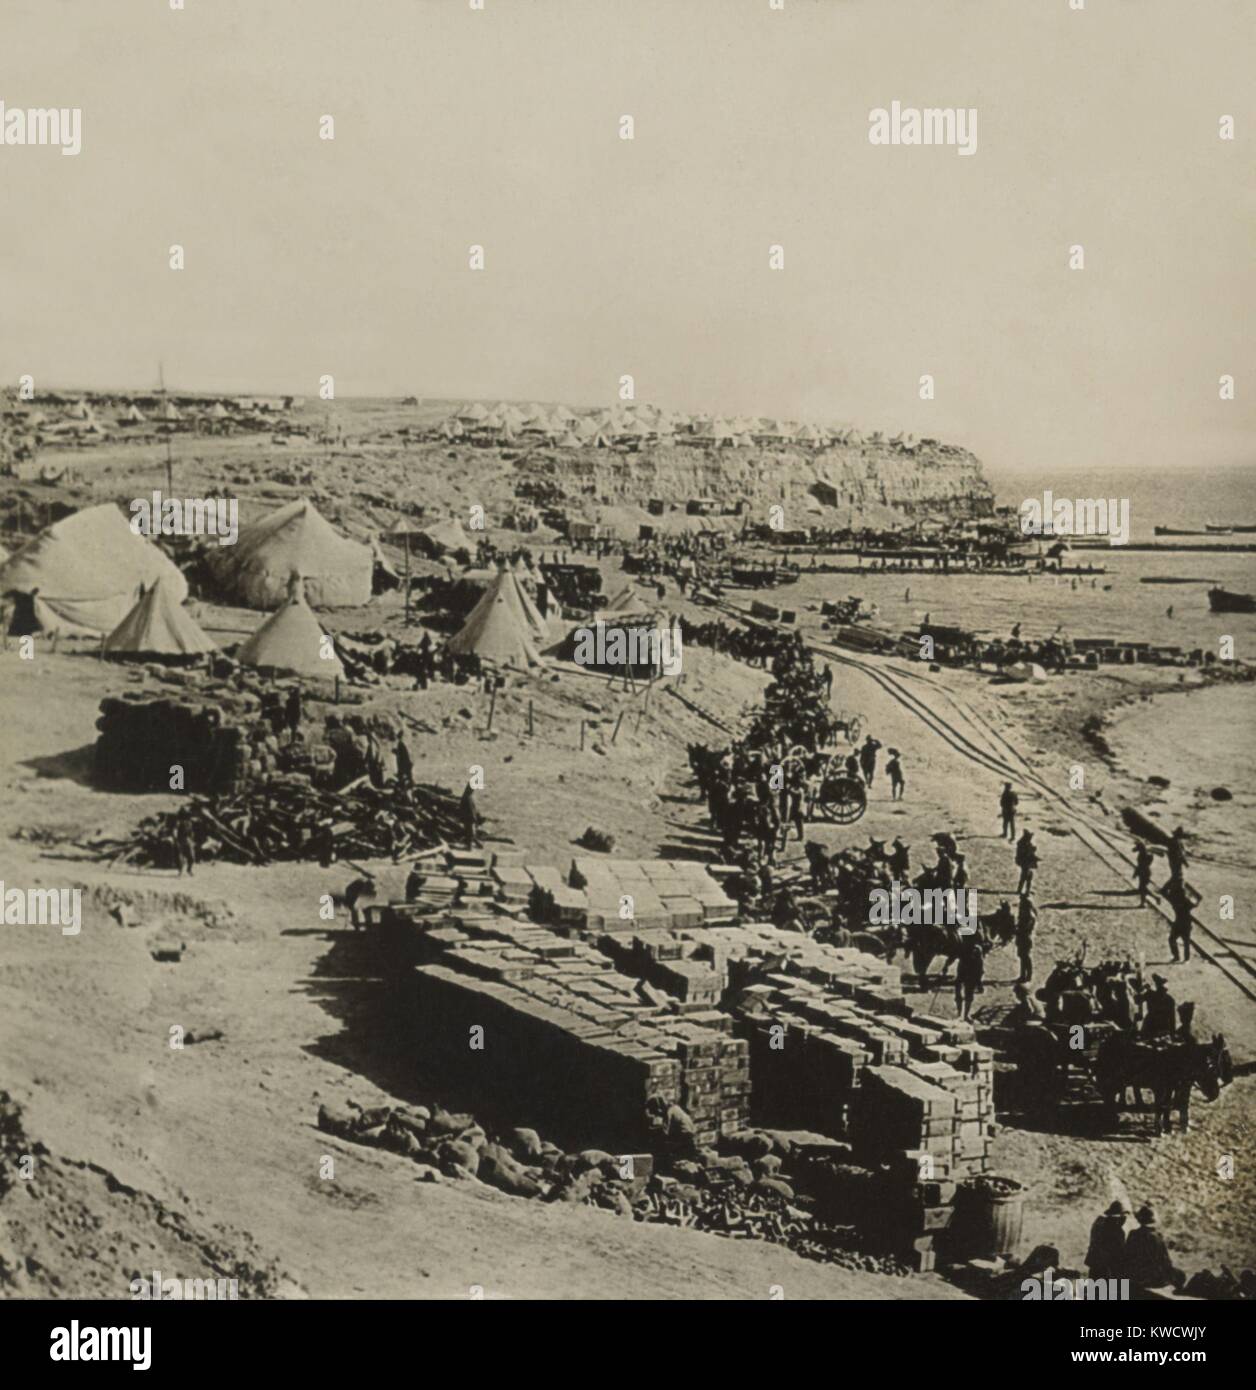 West Beach on Suvla Bay, Gallipoli, after 20,000 British landed during WW1, on August 6, 1915. The Battle of Scimitar Hill followed on Aug. 21, but failed to link with the Anzac sectors to the south. The position was abandoned in Dec. 1915 (BSLOC 2017 1 150) Stock Photo